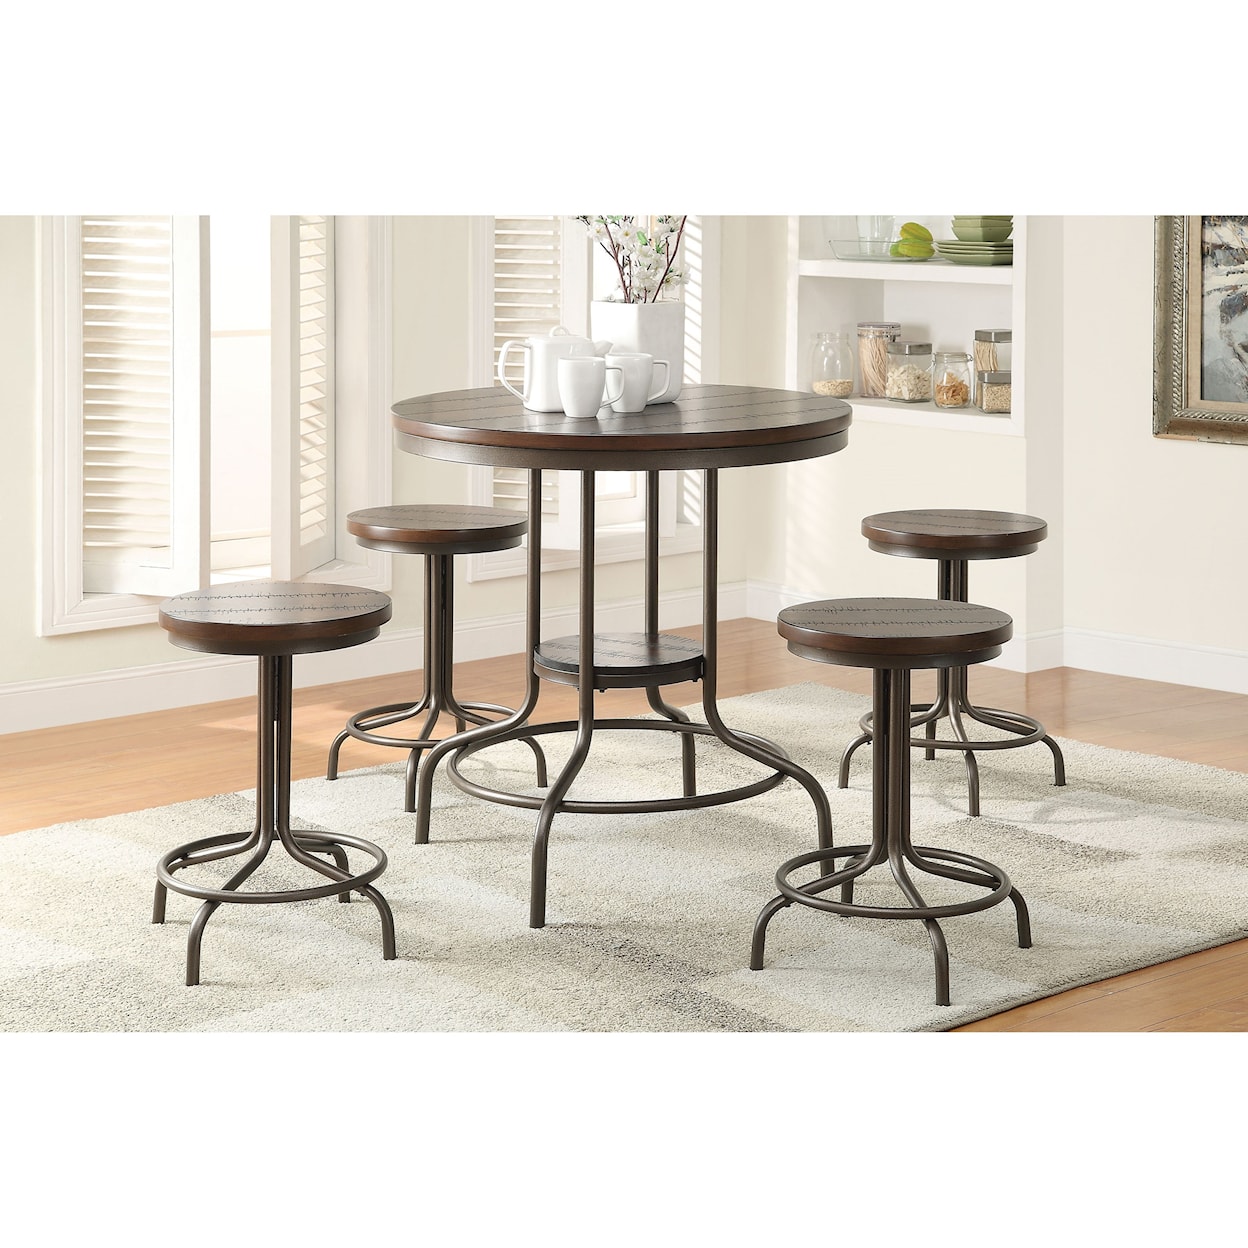 Acme Furniture Burney Counter Height Dining Set with 4 Stools